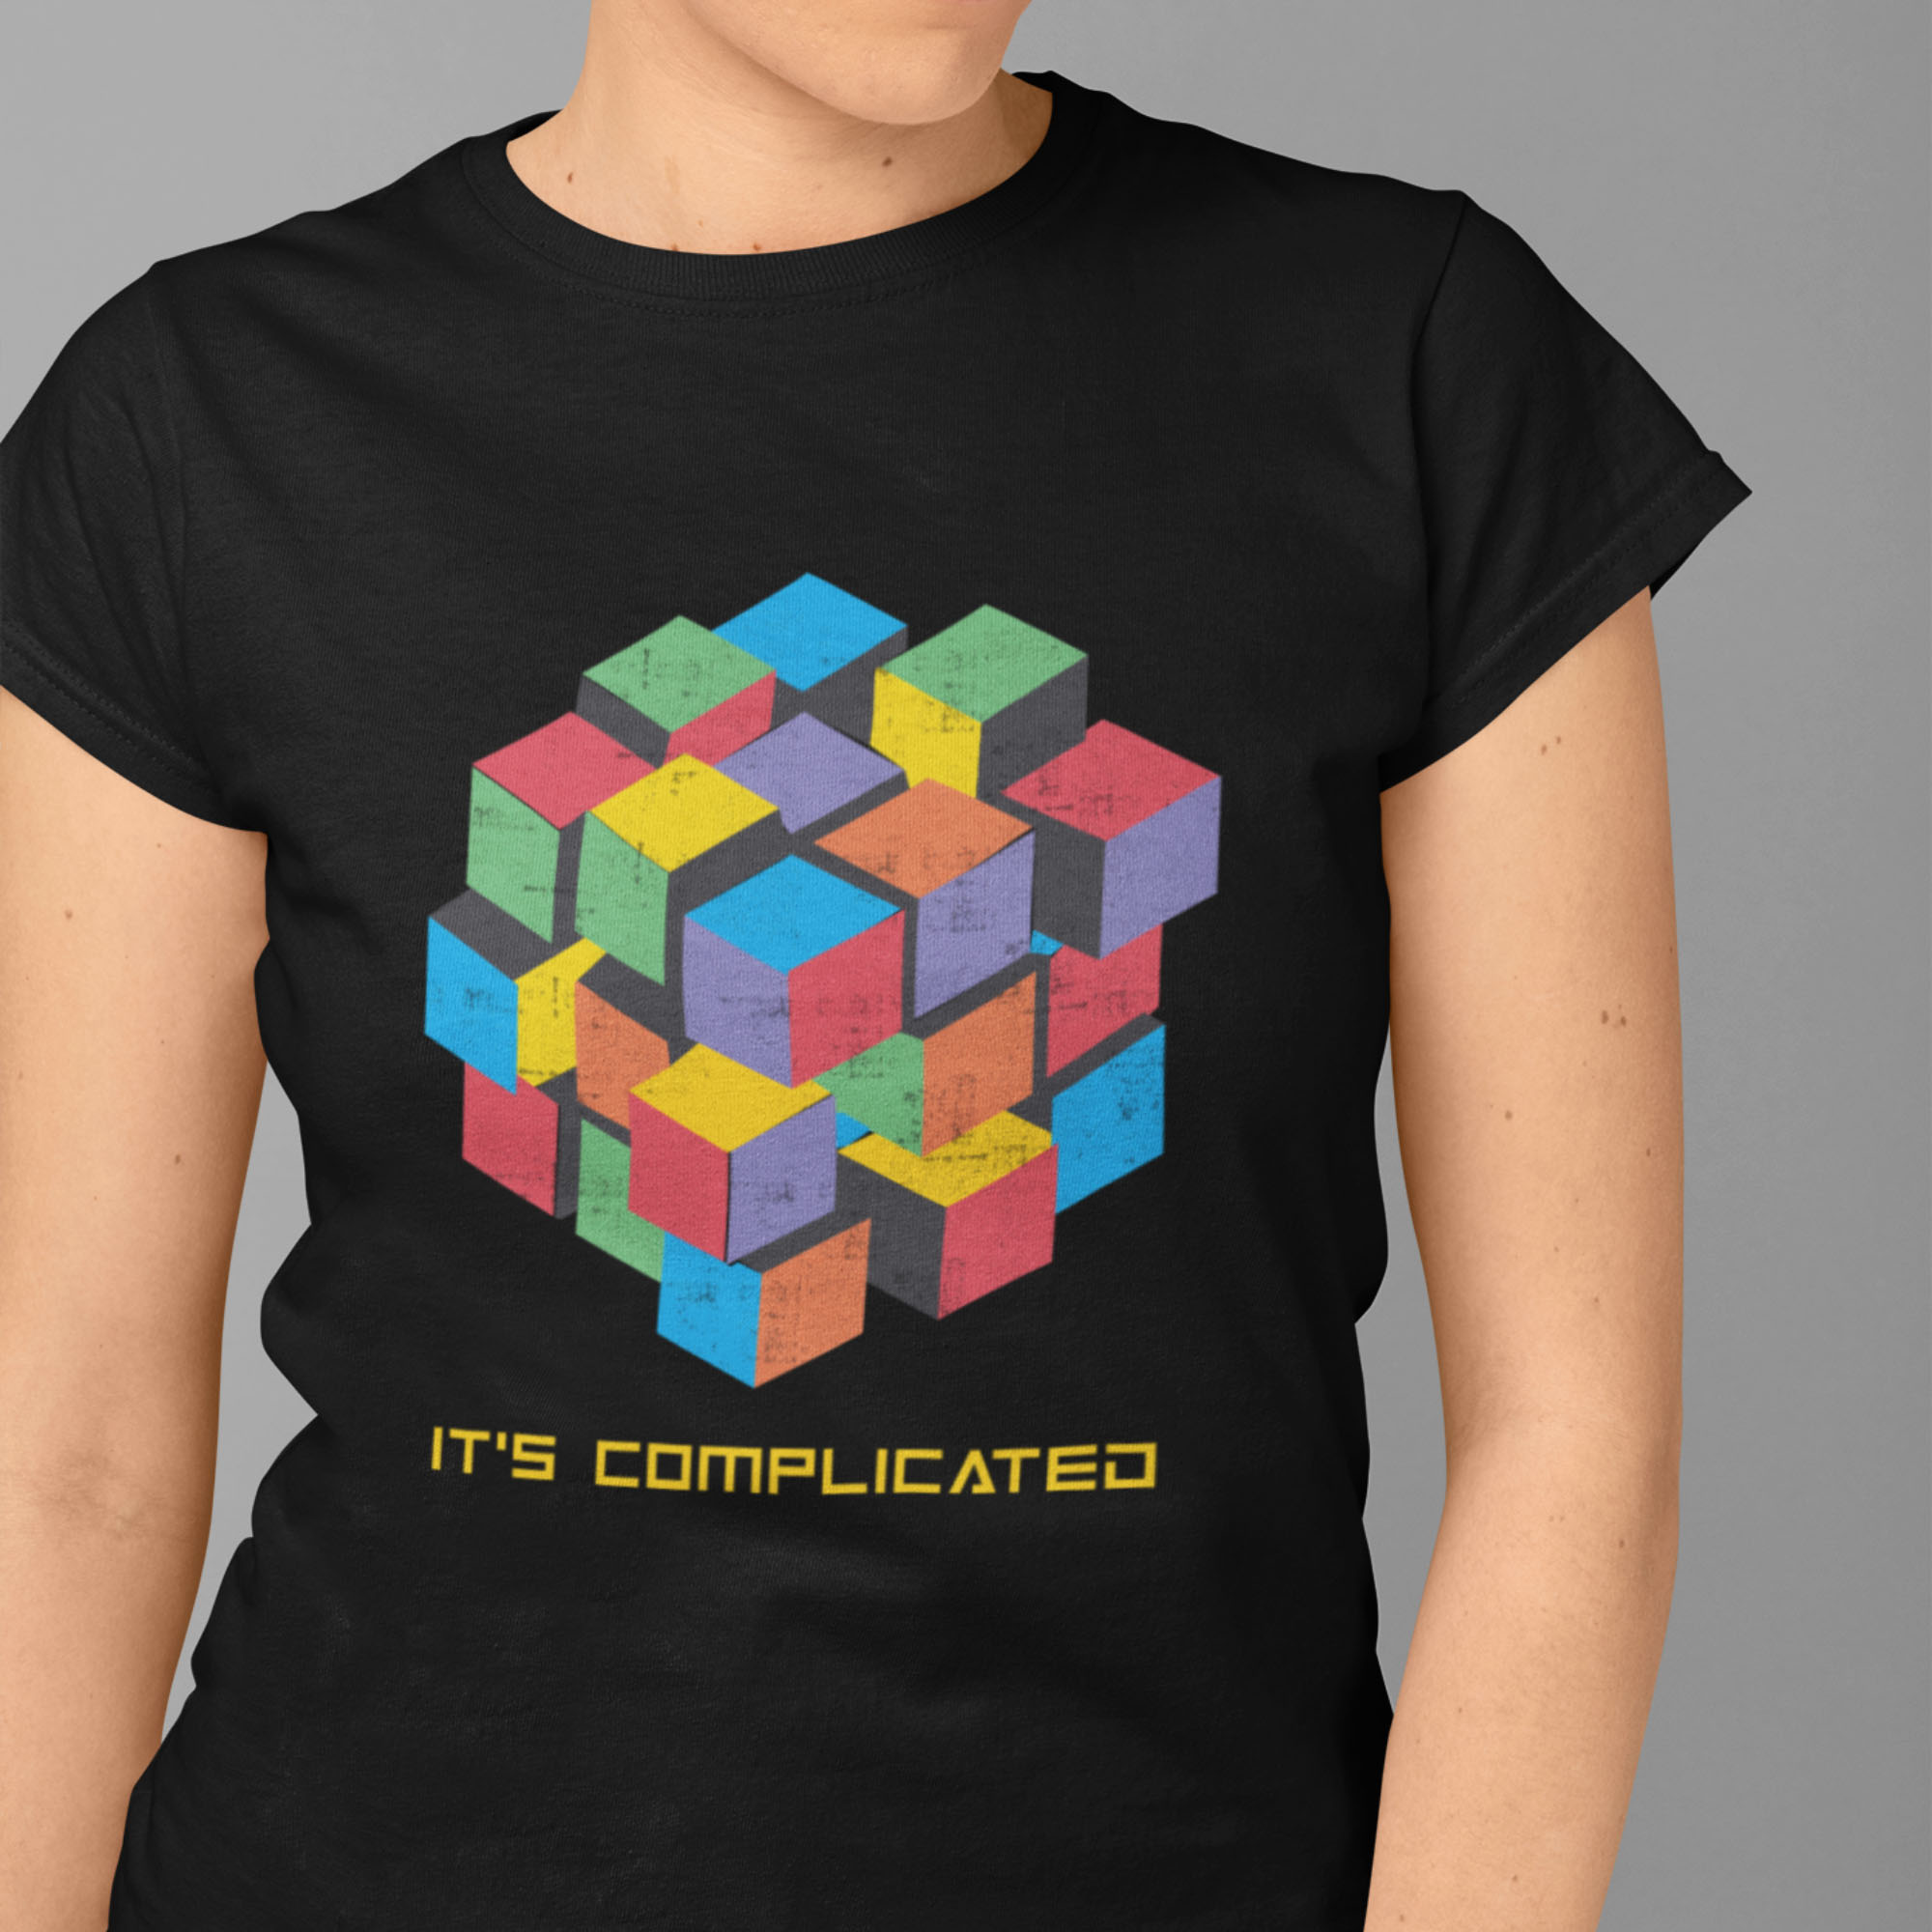 It's Complicated Tshirt